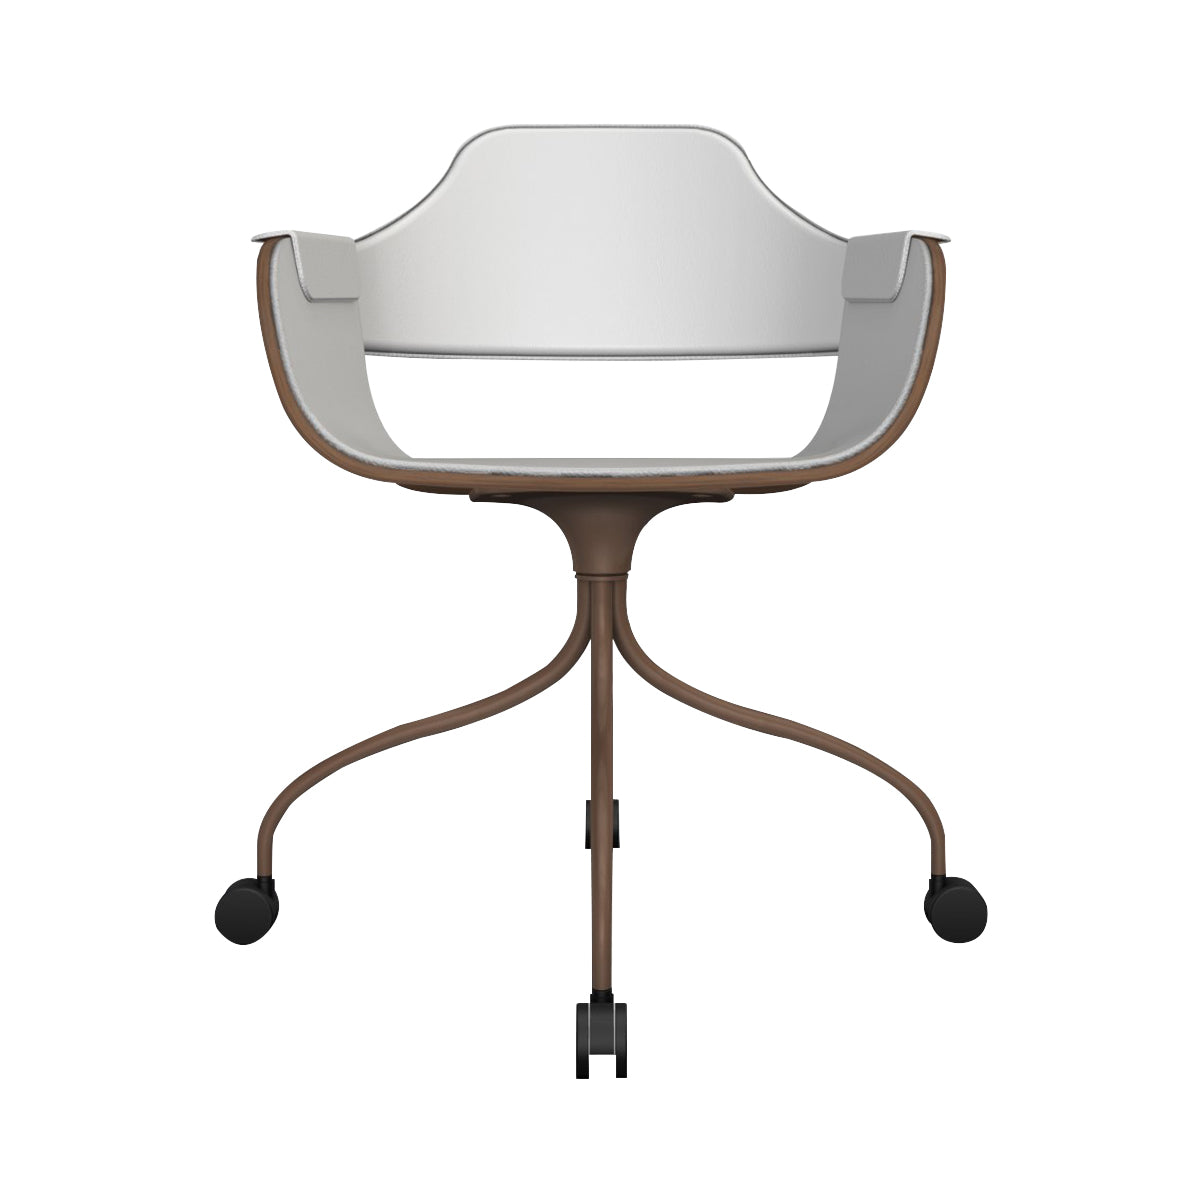 Showtime Chair with Wheel: Full Upholstered + Pale Brown